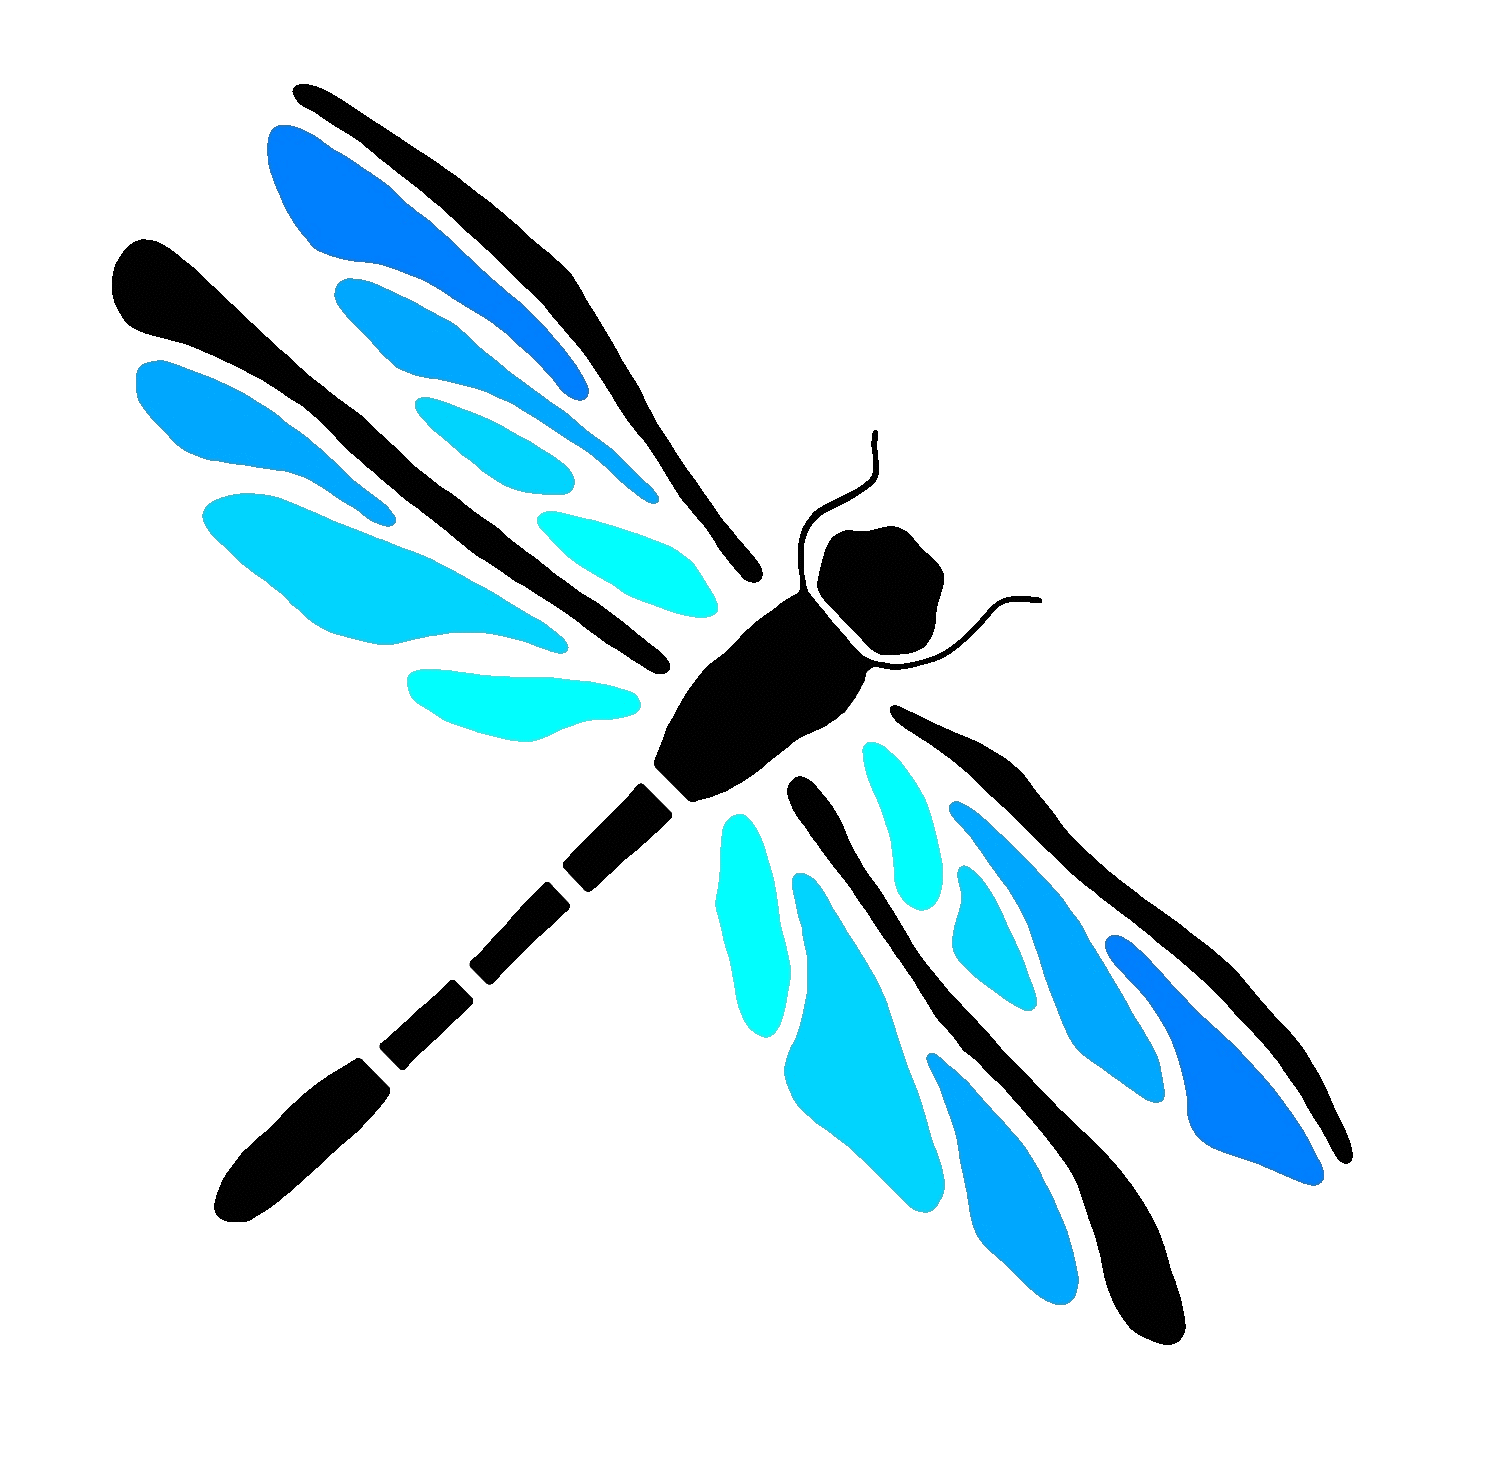 dragonfly blue vector photo #39366